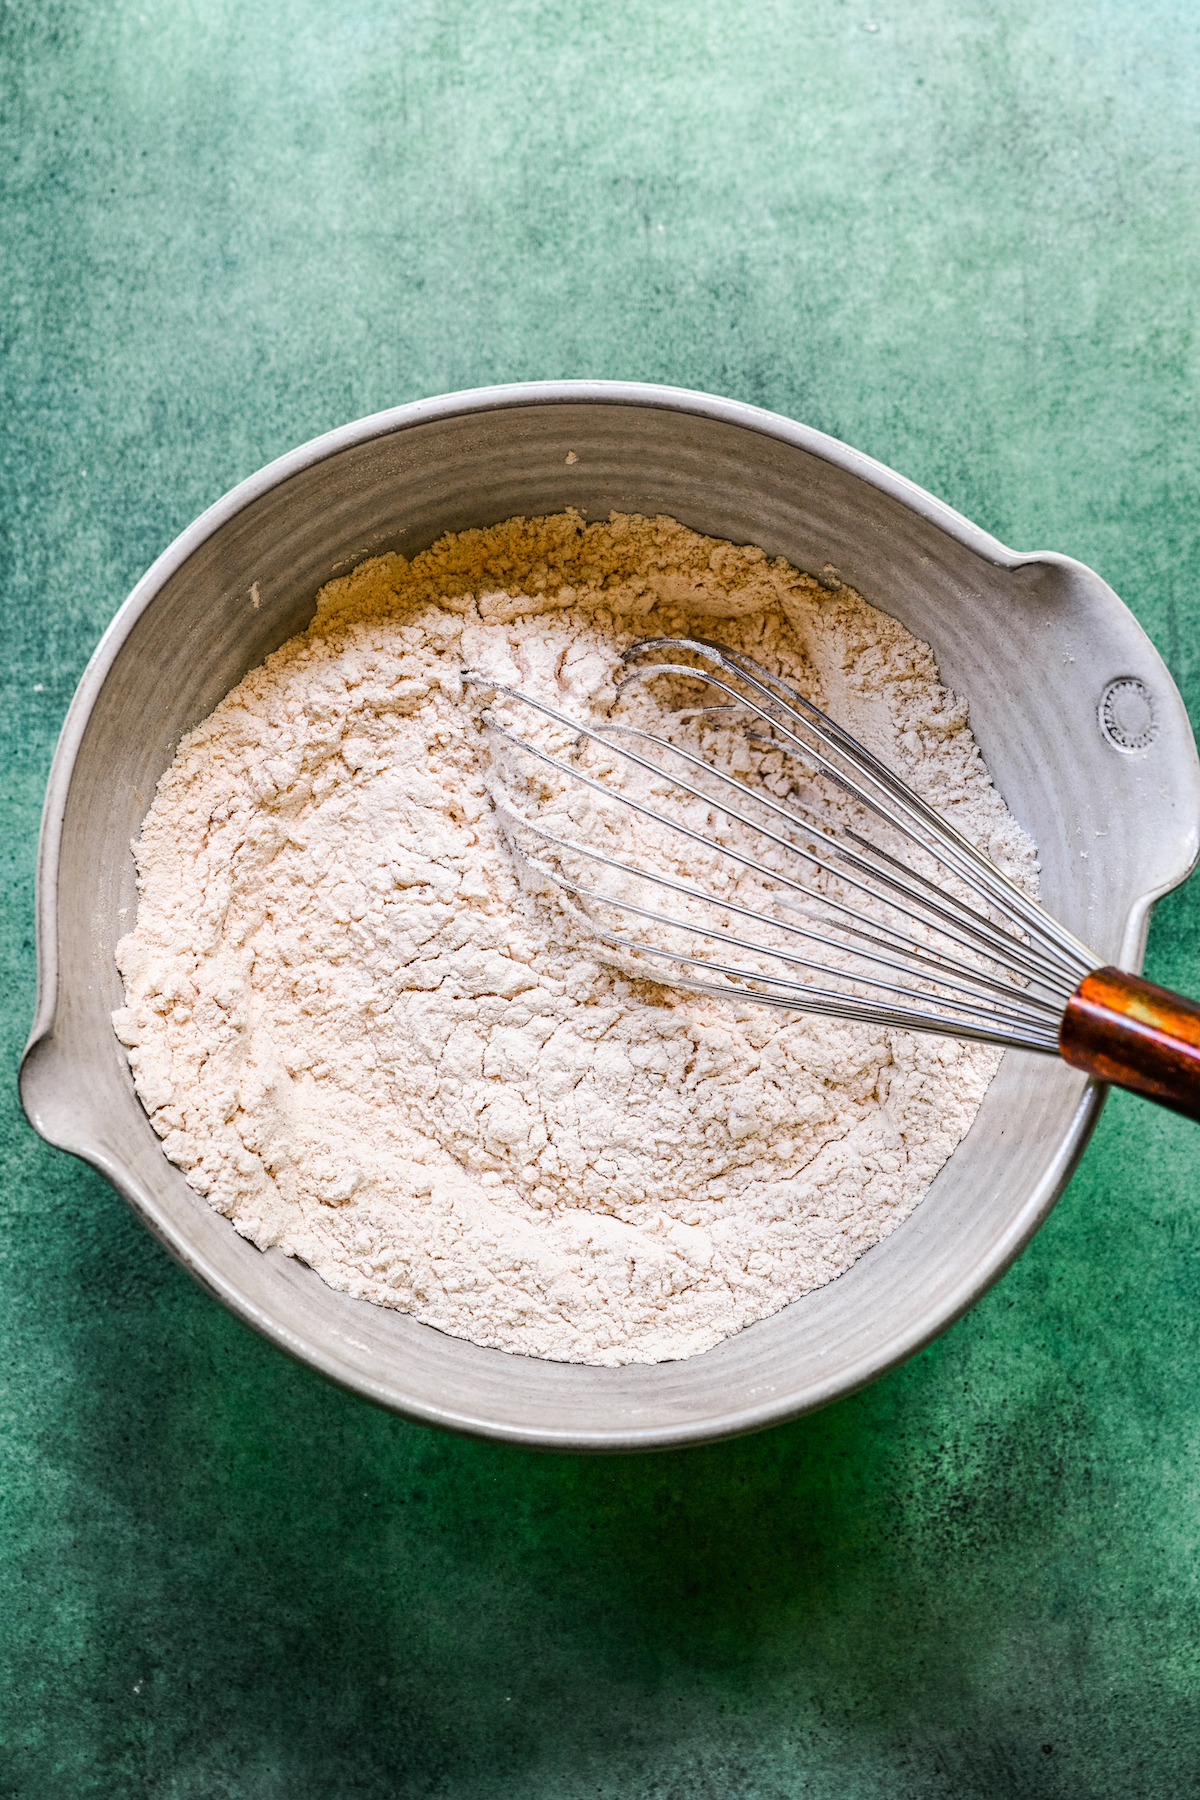 Dry baking ingredients whisked together in a mixing bowl.